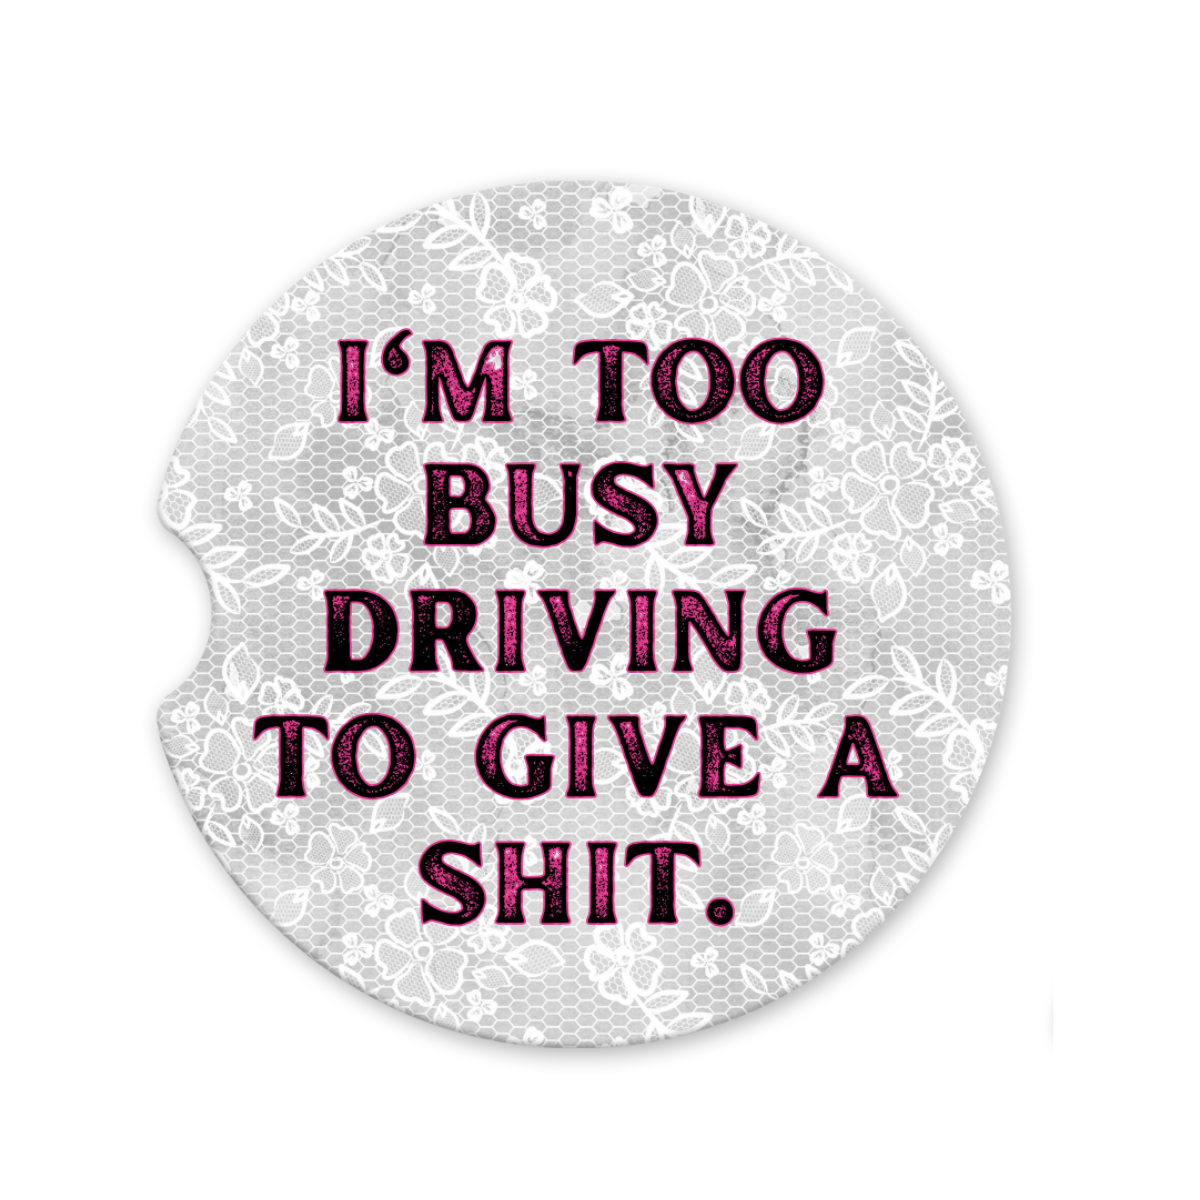 I'm Too Busy Driving | Car Coaster - The Pretty Things.ca